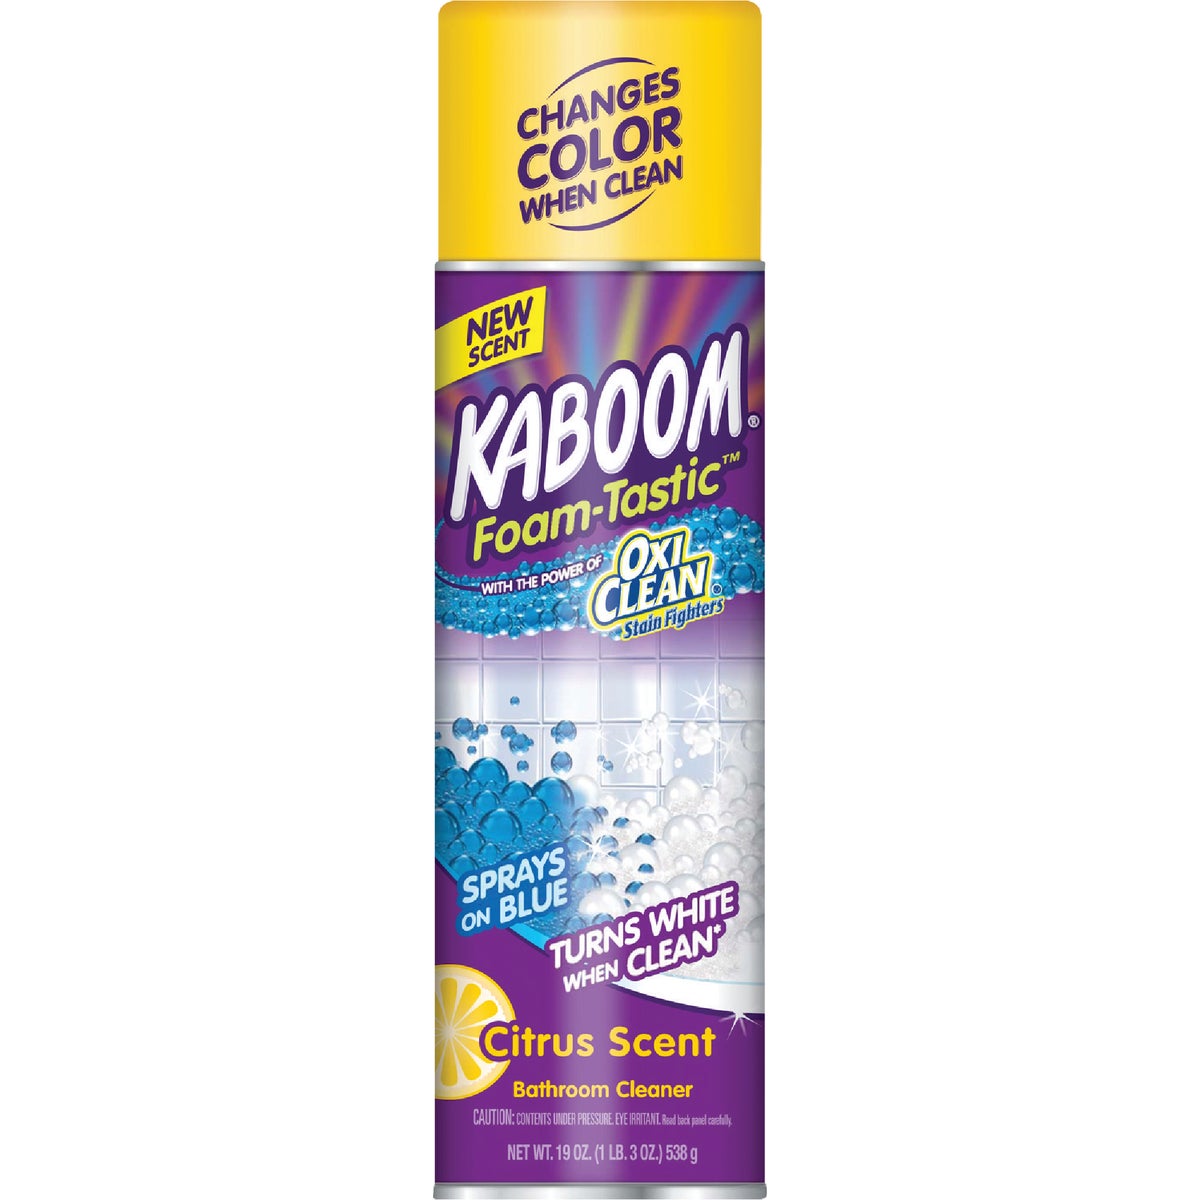 Kaboom Foam-Tastic 19 Oz. Citrus Scent Bathroom Cleaner with OxiClean